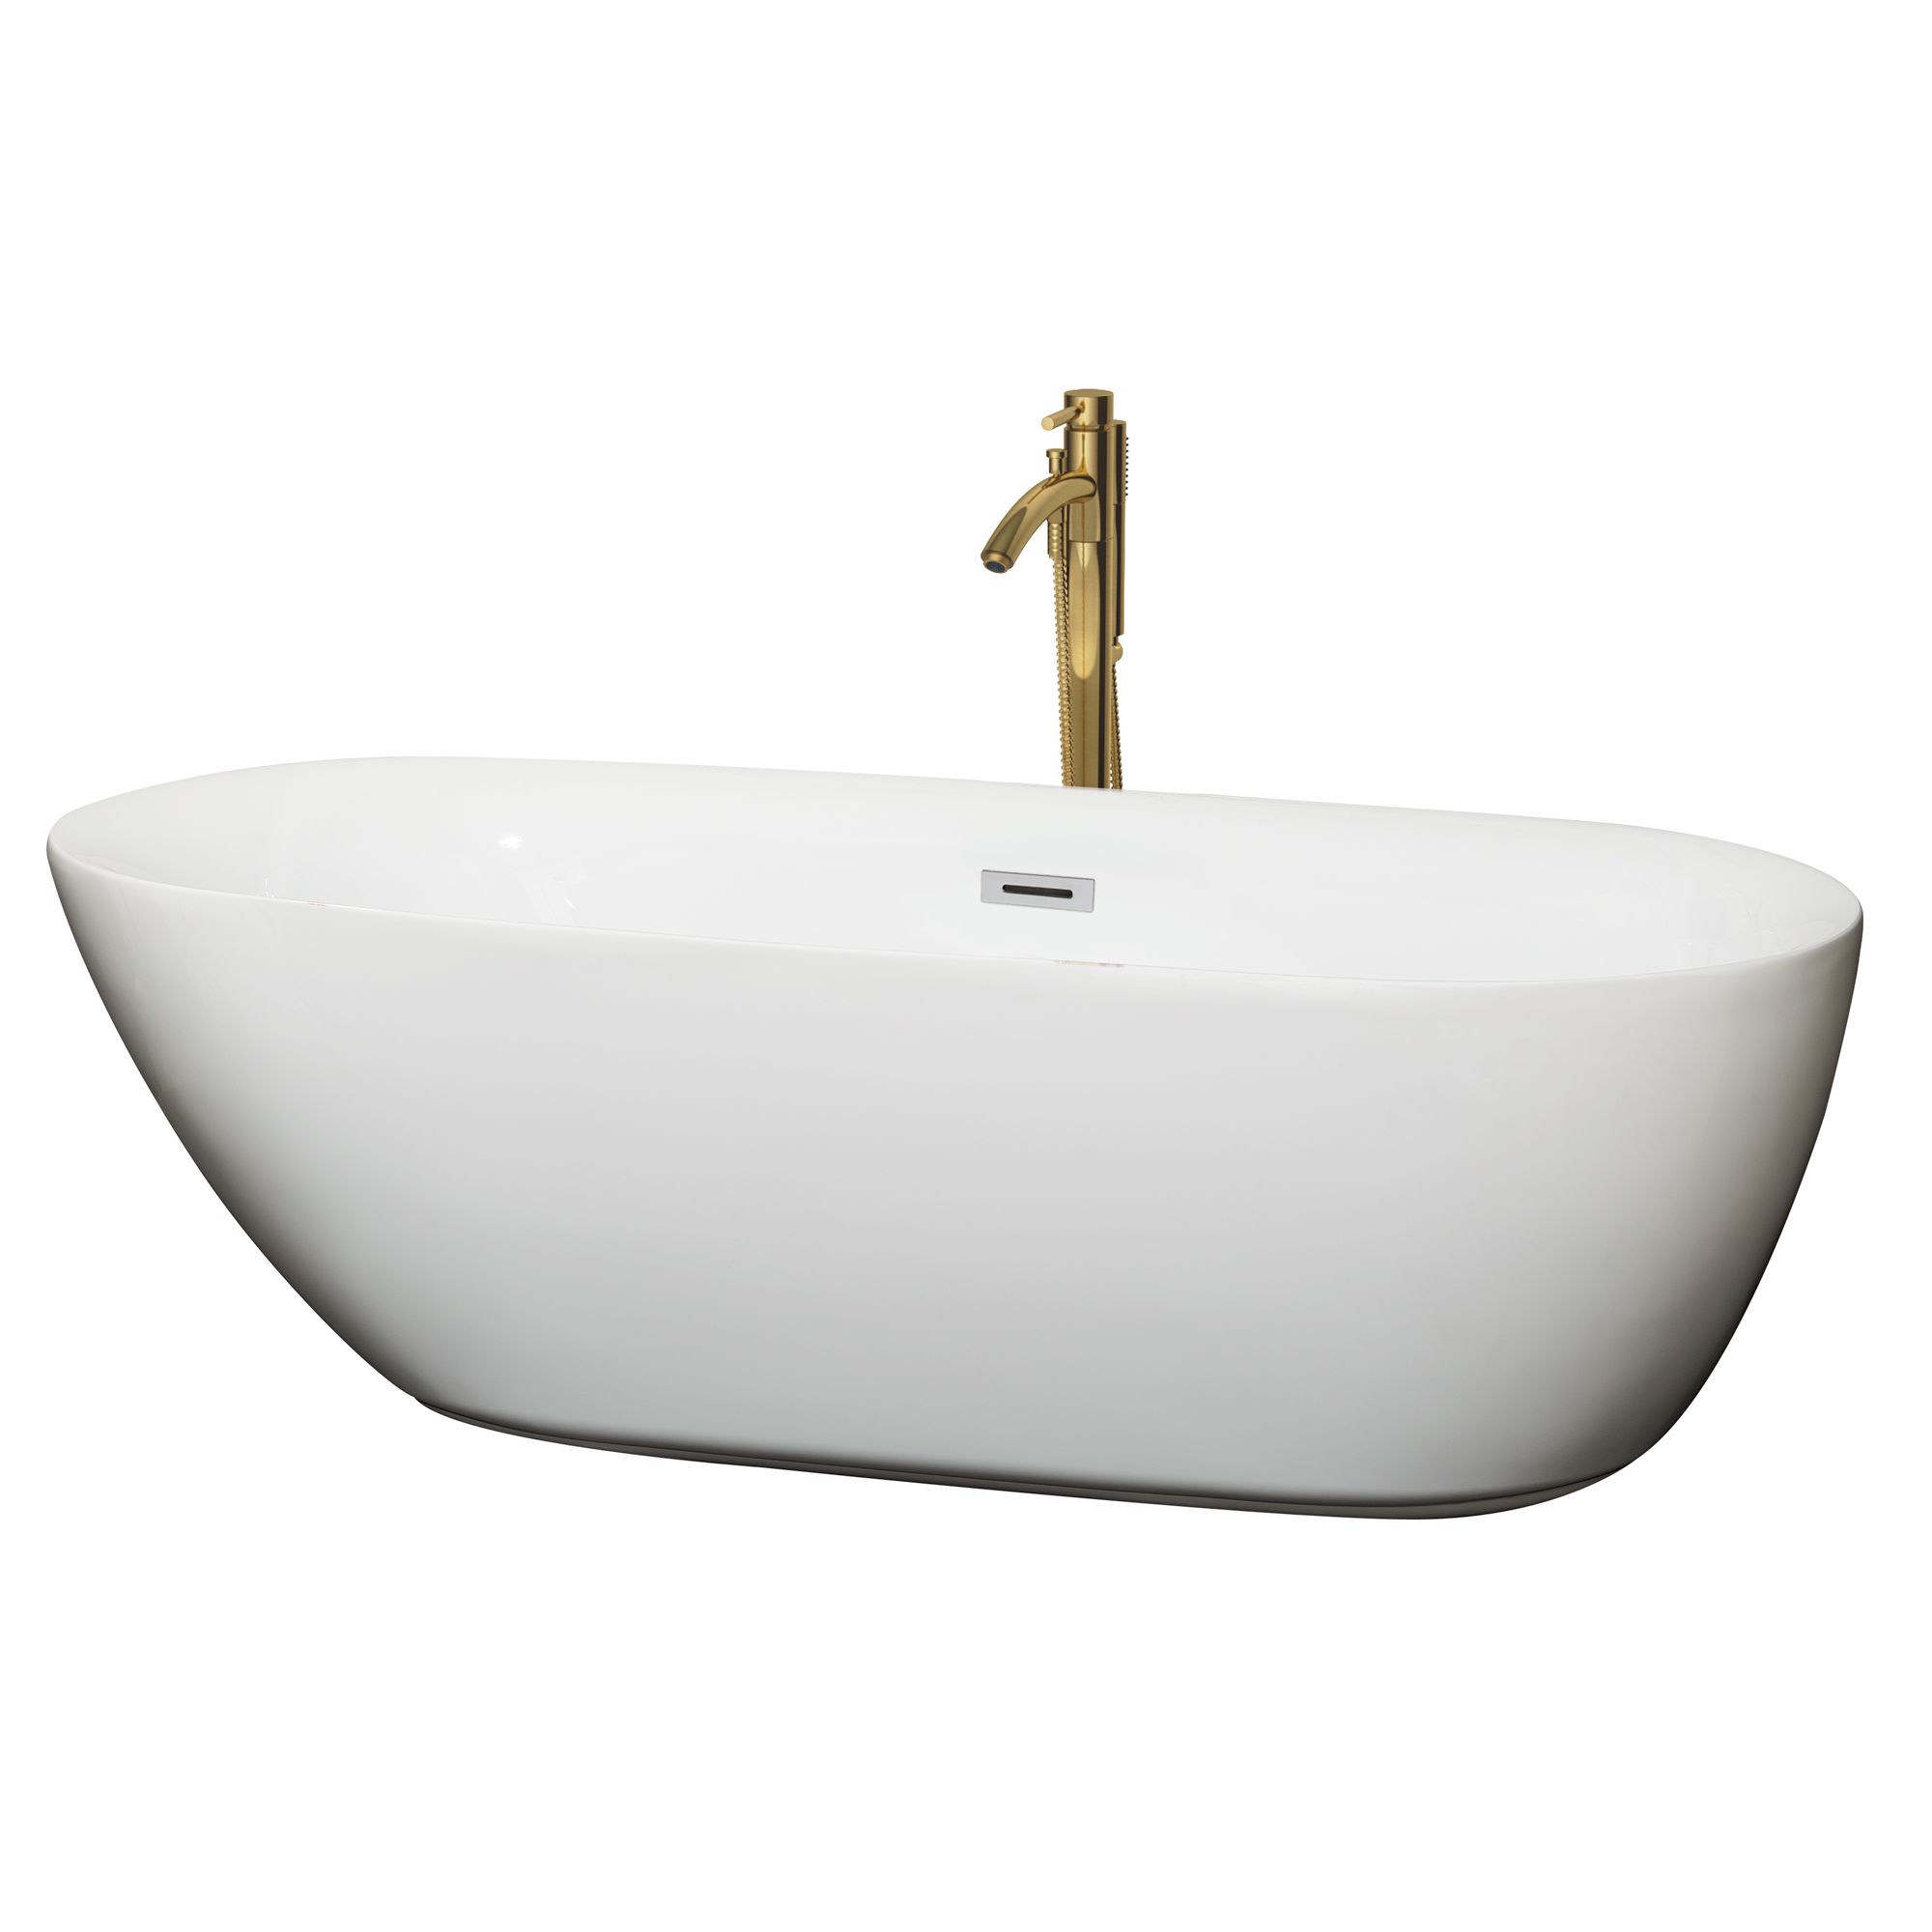 71" Freestanding Bathtub in White with Polished Chrome Trim and Floor Mounted Faucet in Brushed Gold Finish